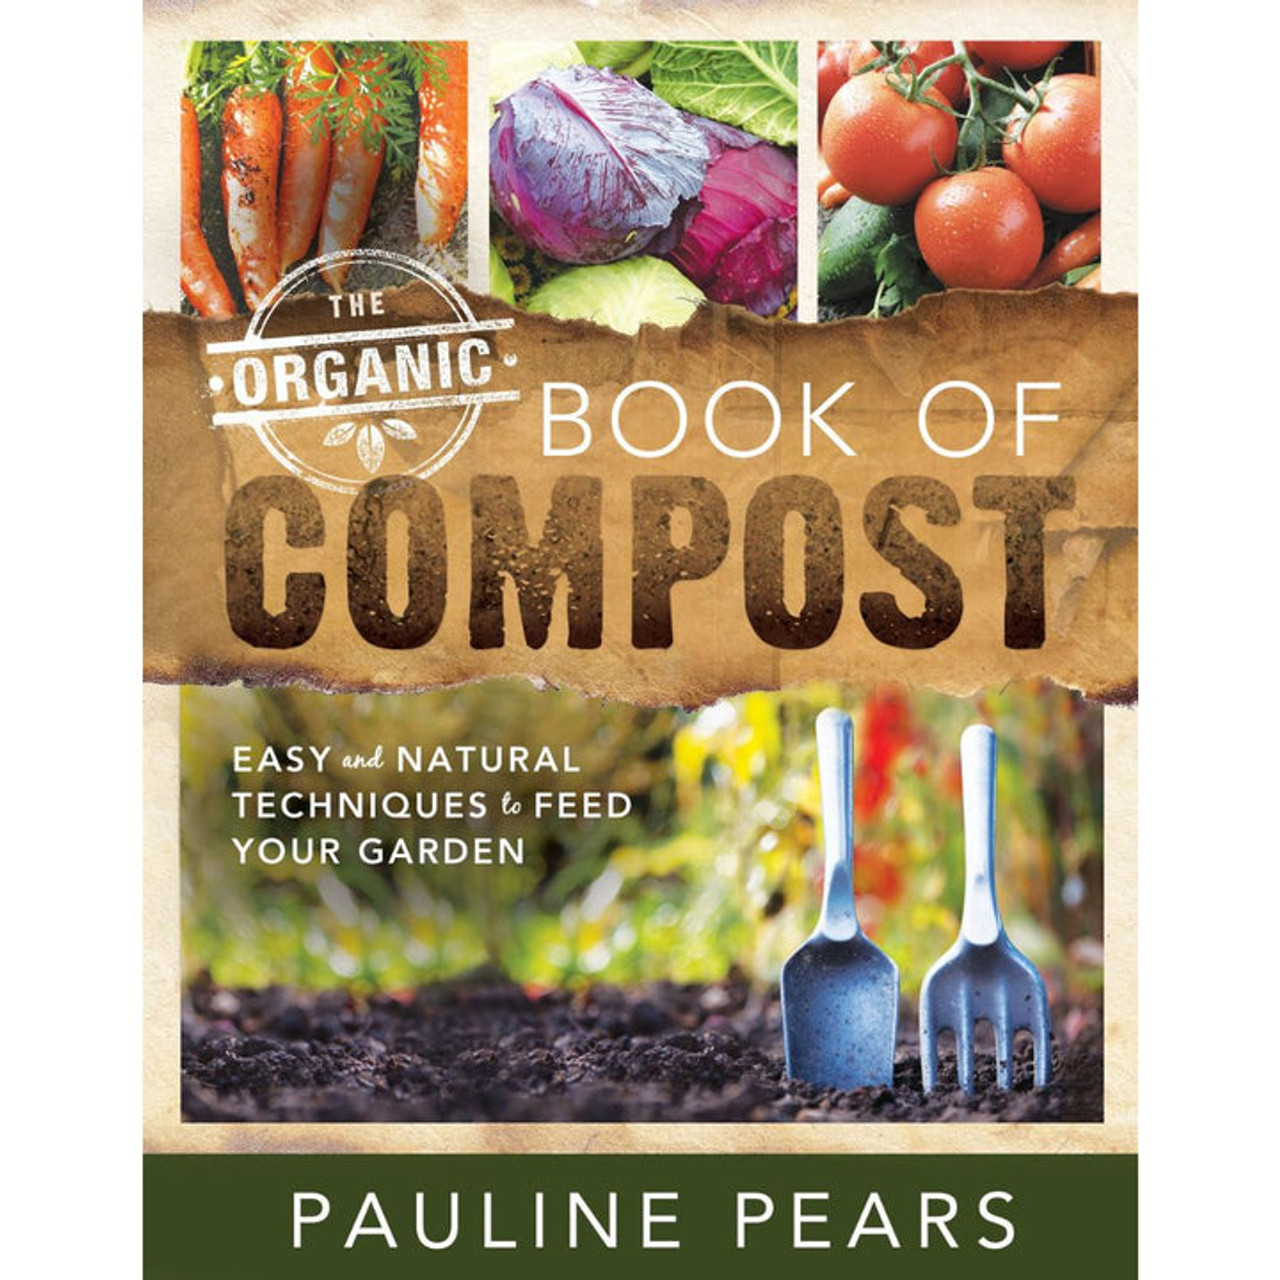 The Organic Book of Compost (Paperback) While Supplies Last